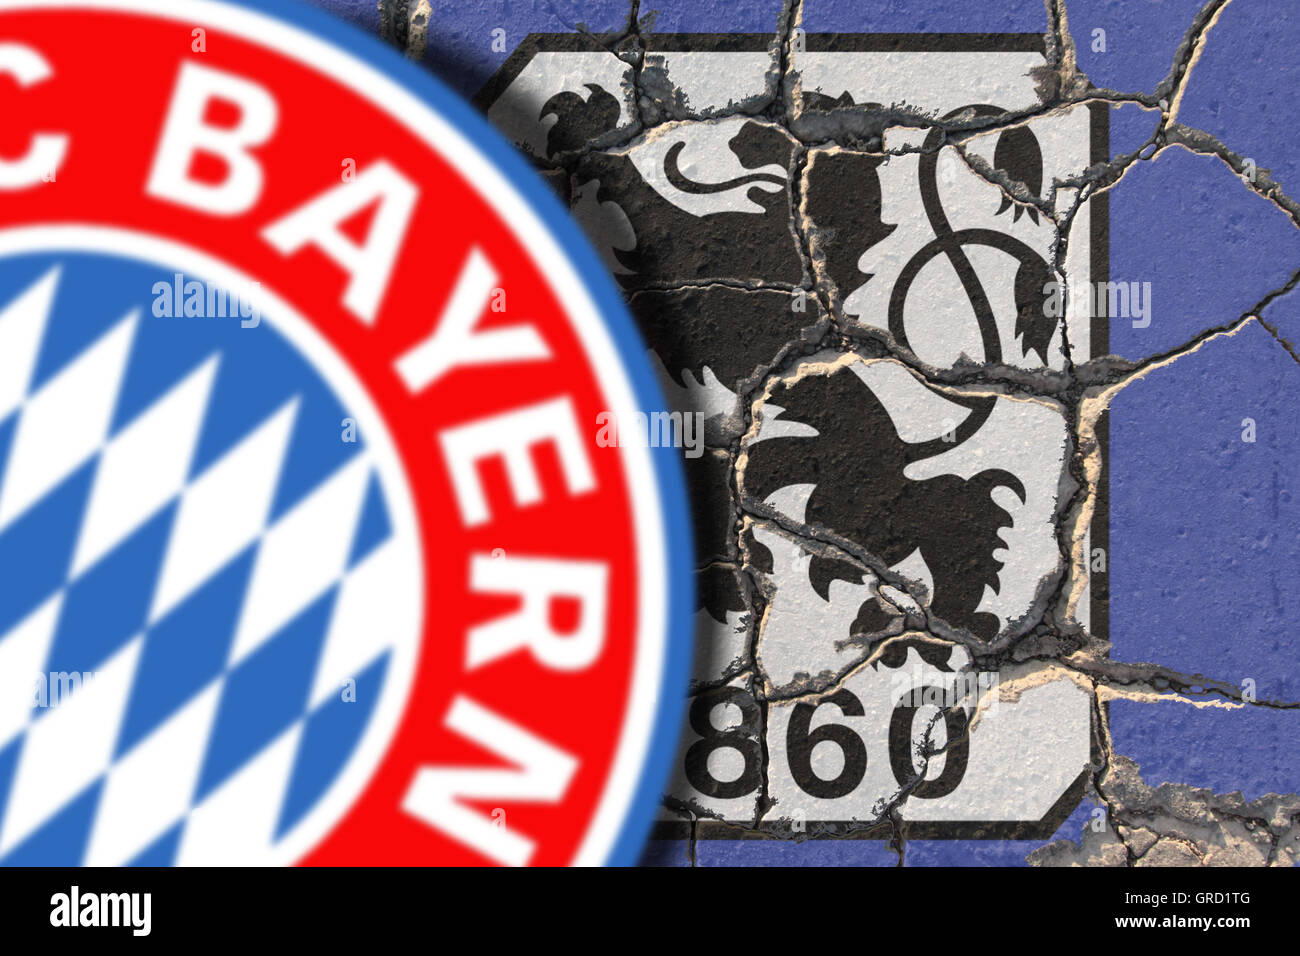 64 1860 München Logo Stock Photos, High-Res Pictures, and Images - Getty  Images